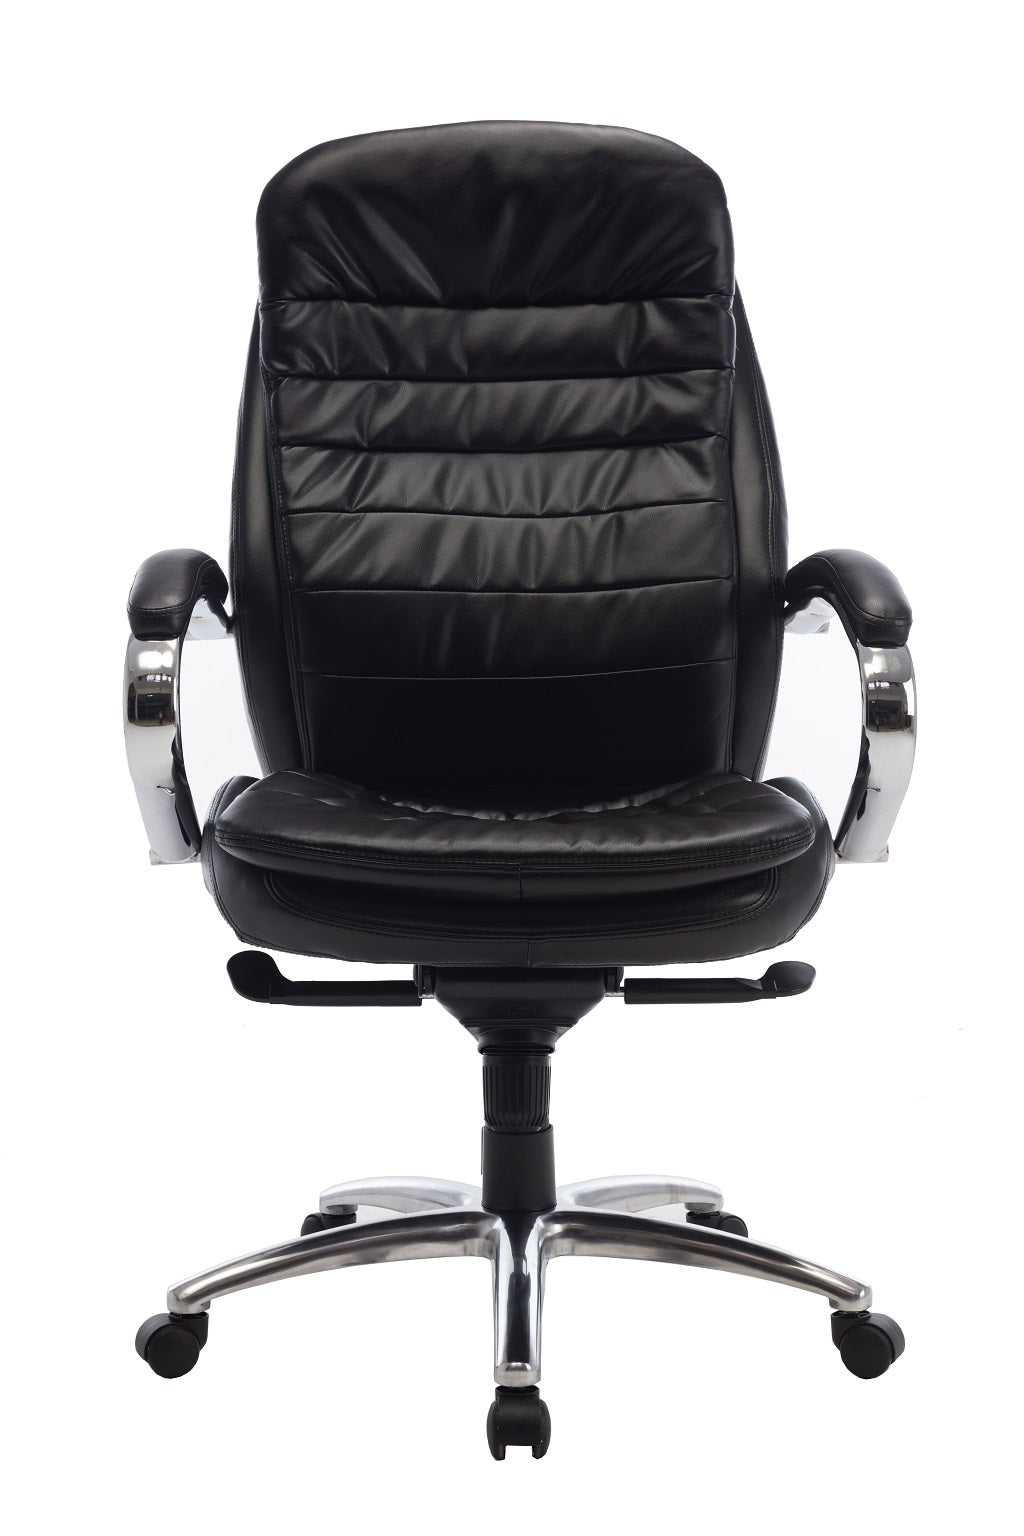 OFFICE SERIES/ 4510 COMPUTER OFFICE CHAIR (BLACK)